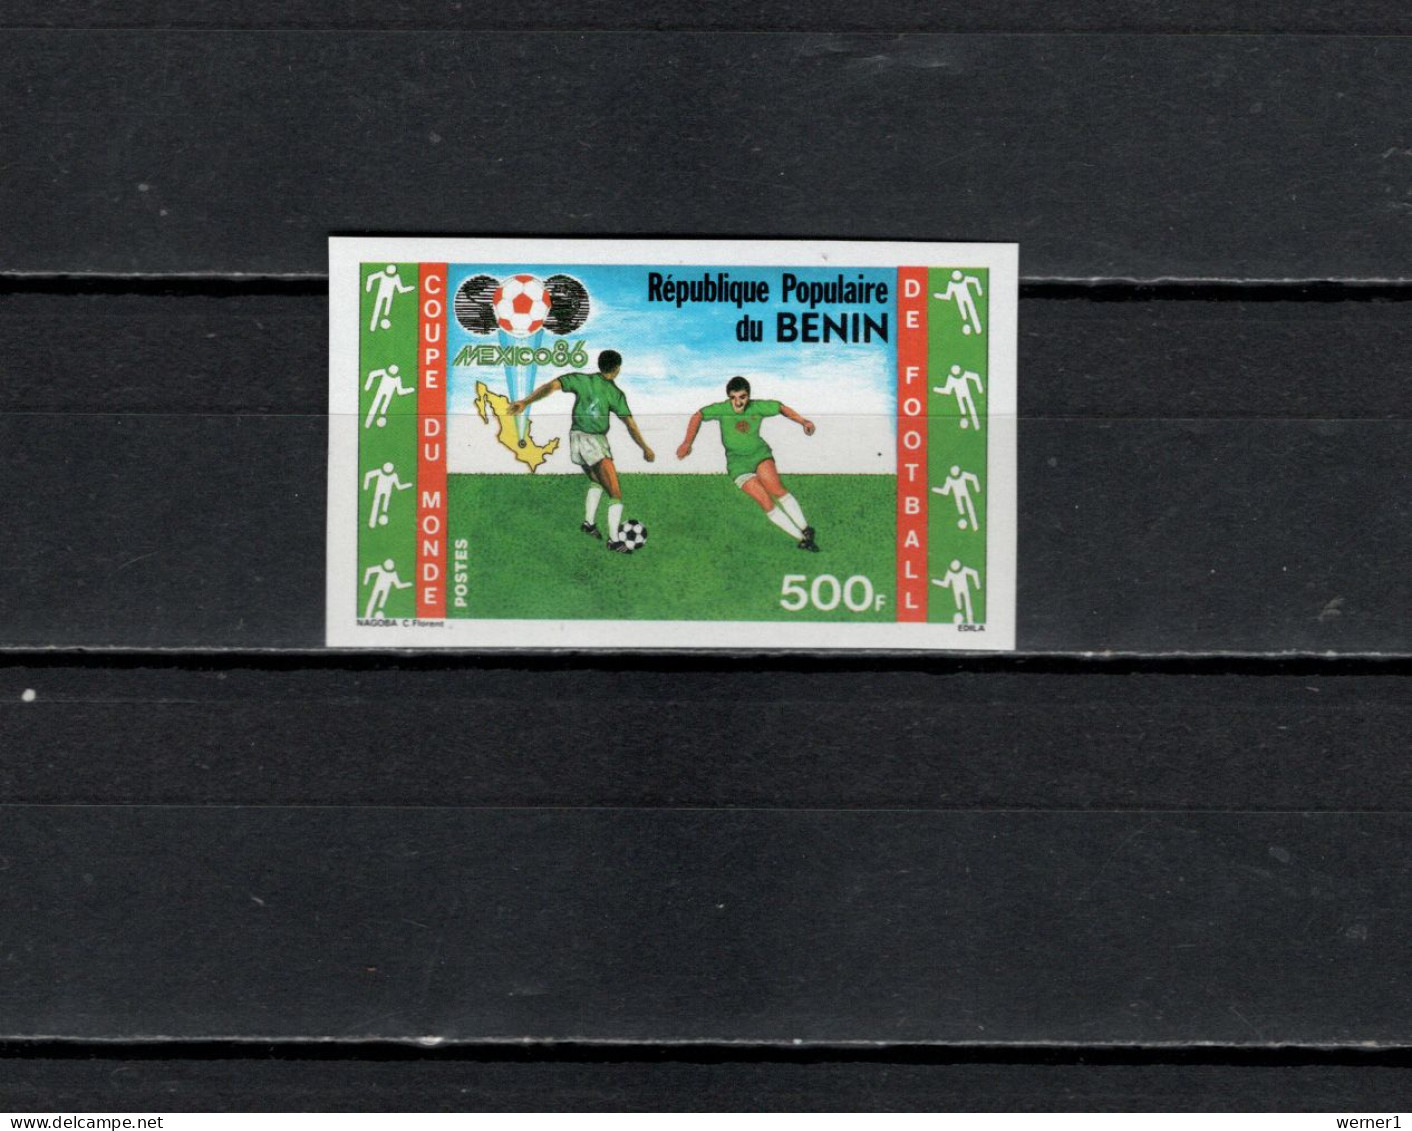 Benin 1986 Football Soccer World Cup Stamp Imperf. MNH -scarce- - 1986 – Messico